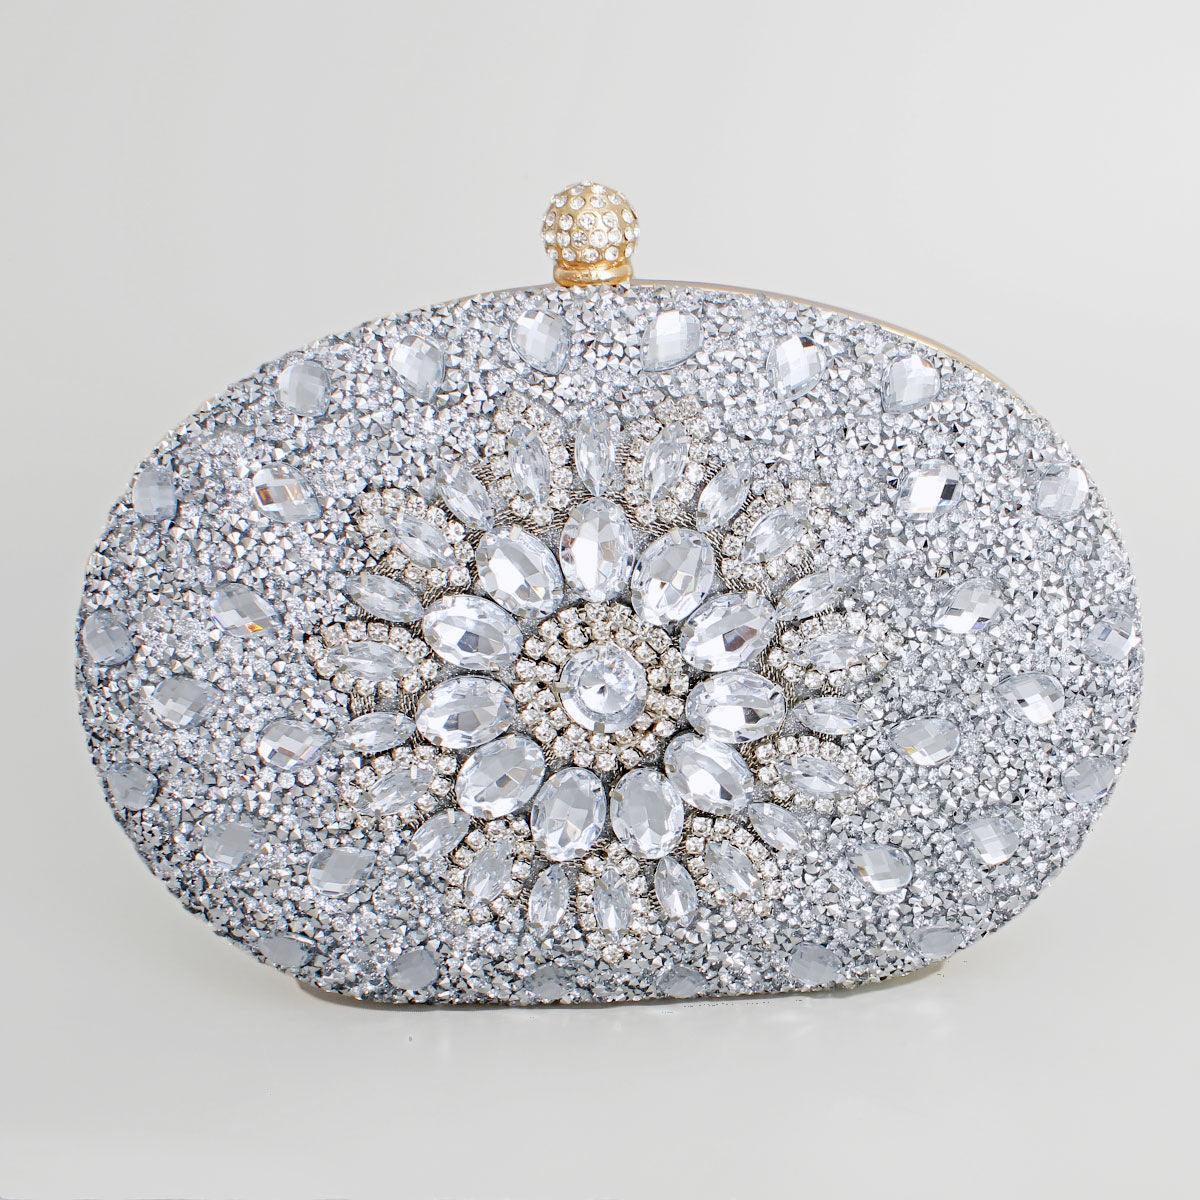 Elegant Silver Crystal Clutch: Perfect Evening Accessory for Women